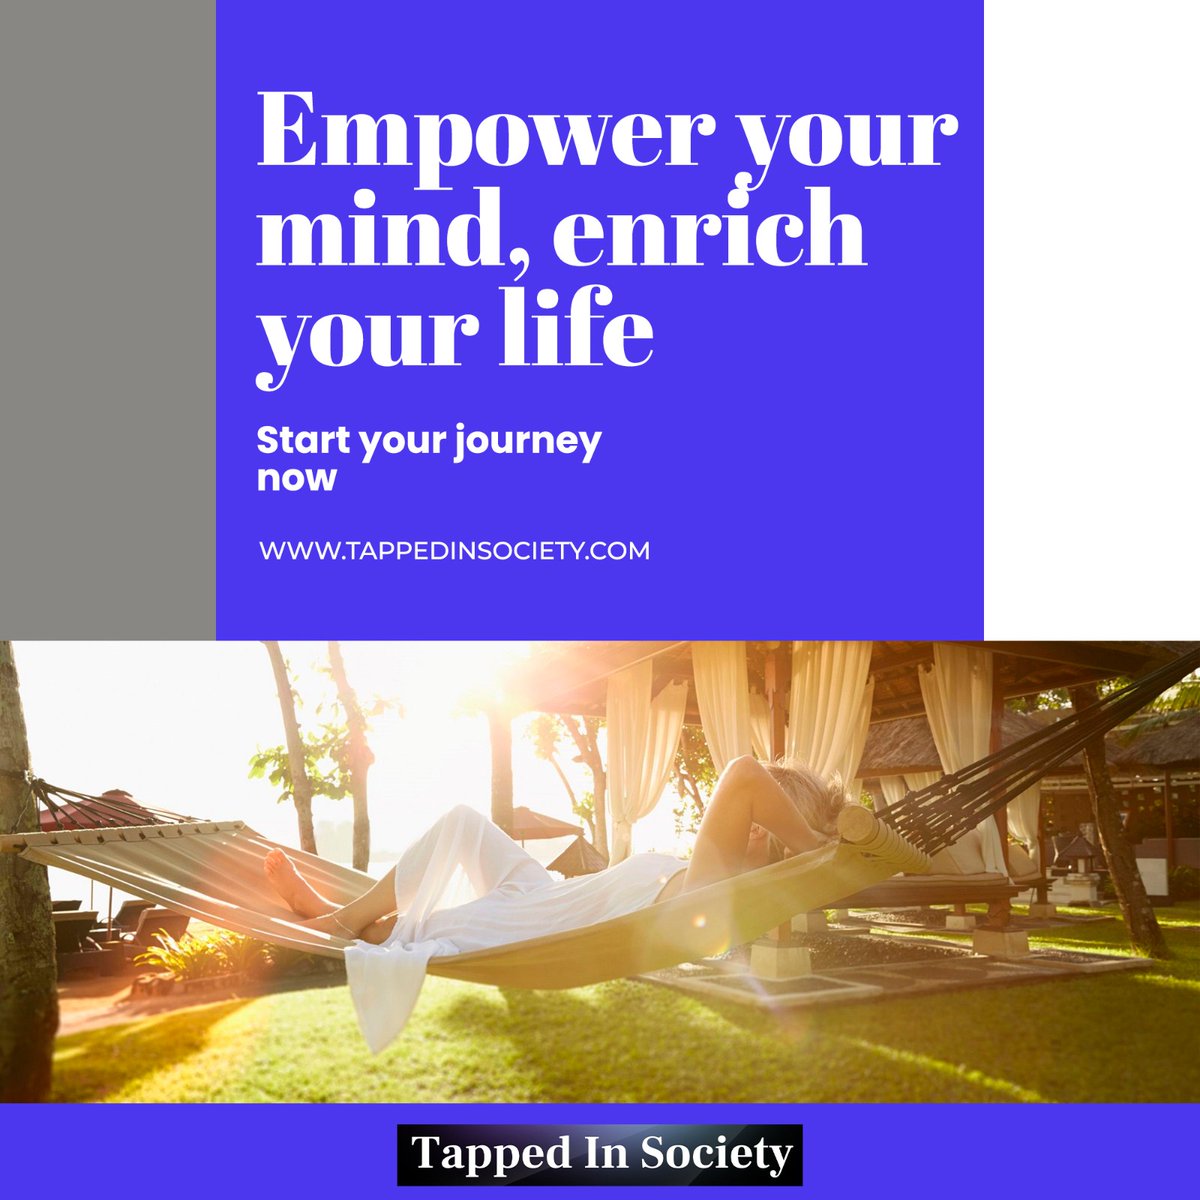 Empower your mind, enrich your life.
💭✨ Don't underestimate the power of positive
thinking and self-belief. 🙌🏼

#mindpower #positivethinking #selfbelief
#empowerment #enrichment #transformation
#growthmindset #selflove #mindfulness #gratitude
#happiness